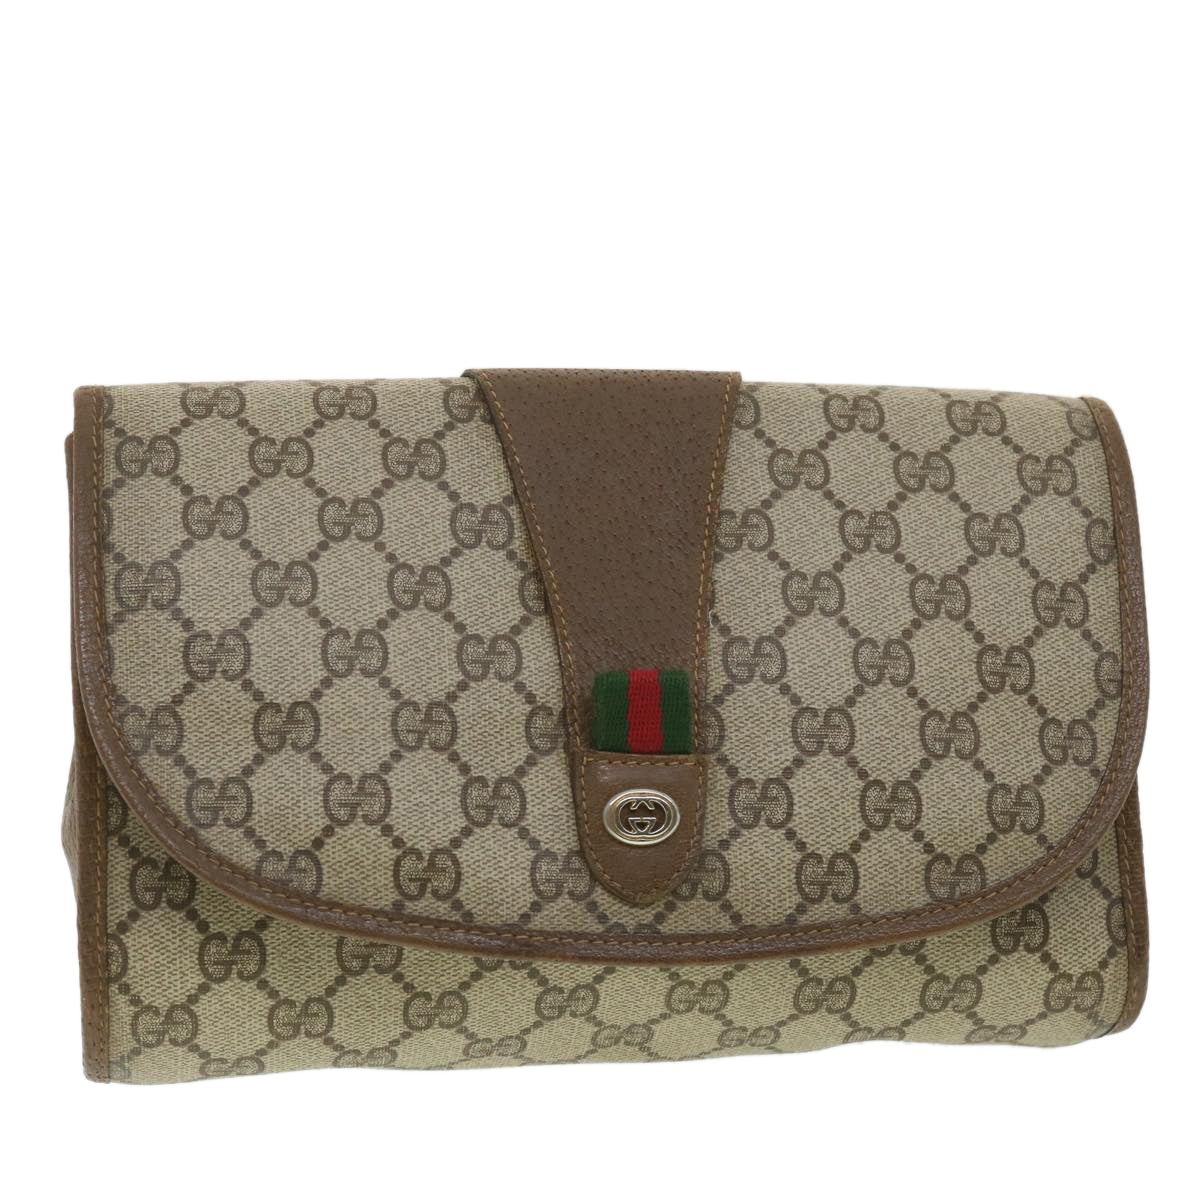 GUCCI GG Canvas Web Sherry Line Clutch Bag Beige Green Red 89.01.030 Auth ny214